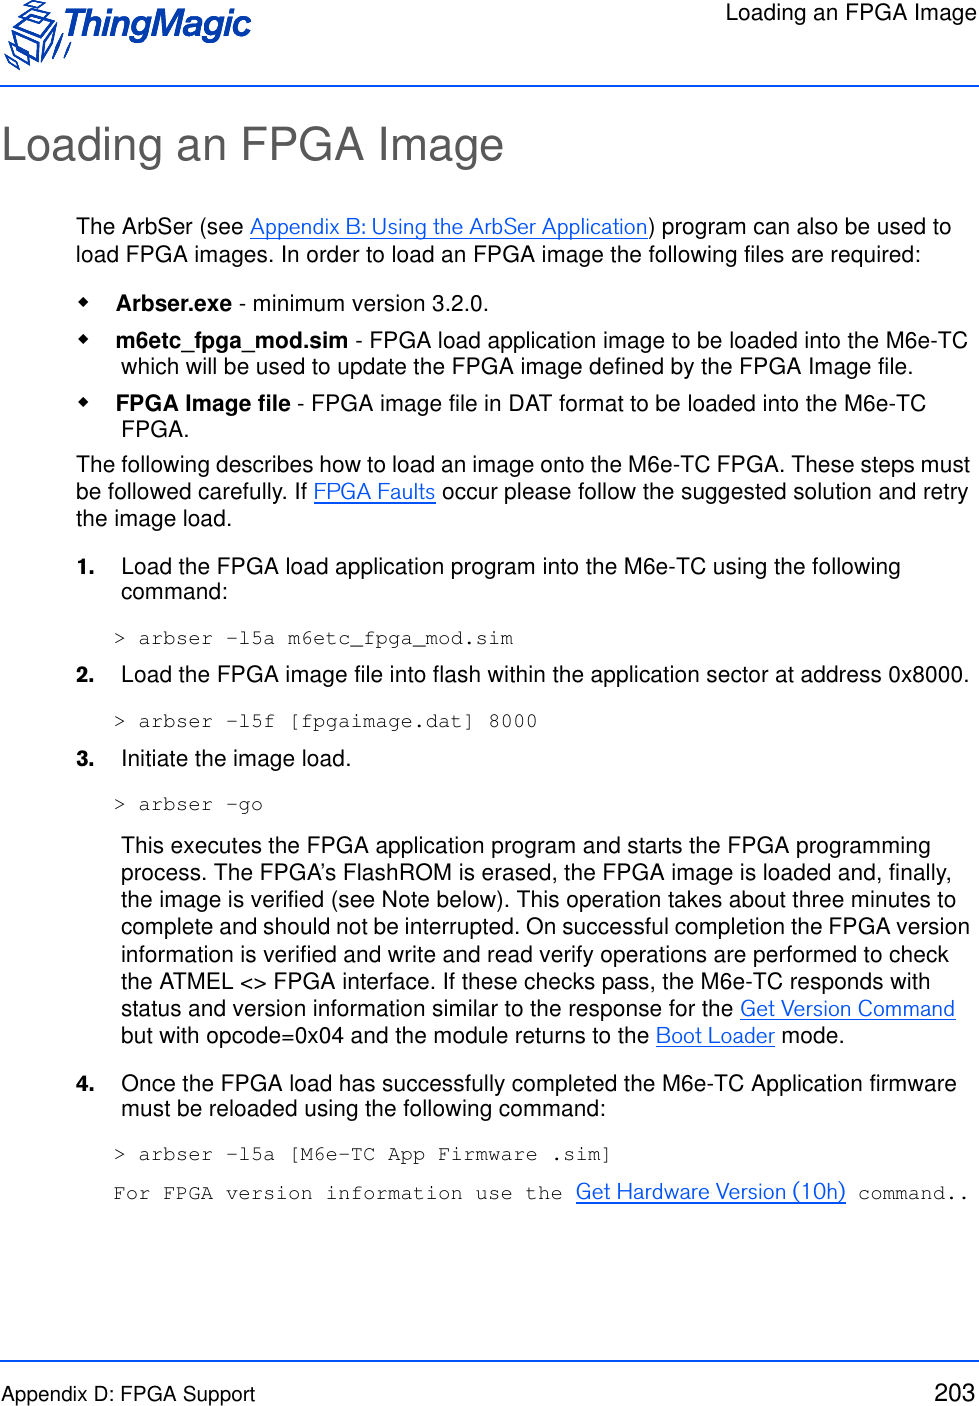 Loading an FPGA ImageAppendix D: FPGA Support 203Loading an FPGA ImageThe ArbSer (see Appendix B: Using the ArbSer Application) program can also be used to load FPGA images. In order to load an FPGA image the following files are required: Arbser.exe - minimum version 3.2.0.  m6etc_fpga_mod.sim - FPGA load application image to be loaded into the M6e-TC which will be used to update the FPGA image defined by the FPGA Image file. FPGA Image file - FPGA image file in DAT format to be loaded into the M6e-TC FPGA. The following describes how to load an image onto the M6e-TC FPGA. These steps must be followed carefully. If FPGA Faults occur please follow the suggested solution and retry the image load.1.    Load the FPGA load application program into the M6e-TC using the following command:&gt; arbser -l5a m6etc_fpga_mod.sim2.    Load the FPGA image file into flash within the application sector at address 0x8000. &gt; arbser -l5f [fpgaimage.dat] 80003.    Initiate the image load. &gt; arbser -goThis executes the FPGA application program and starts the FPGA programming process. The FPGA’s FlashROM is erased, the FPGA image is loaded and, finally, the image is verified (see Note below). This operation takes about three minutes to complete and should not be interrupted. On successful completion the FPGA version information is verified and write and read verify operations are performed to check the ATMEL &lt;&gt; FPGA interface. If these checks pass, the M6e-TC responds with status and version information similar to the response for the Get Version Command but with opcode=0x04 and the module returns to the Boot Loader mode.4.    Once the FPGA load has successfully completed the M6e-TC Application firmware must be reloaded using the following command:&gt; arbser -l5a [M6e-TC App Firmware .sim]For FPGA version information use the Get Hardware Version (10h) command..